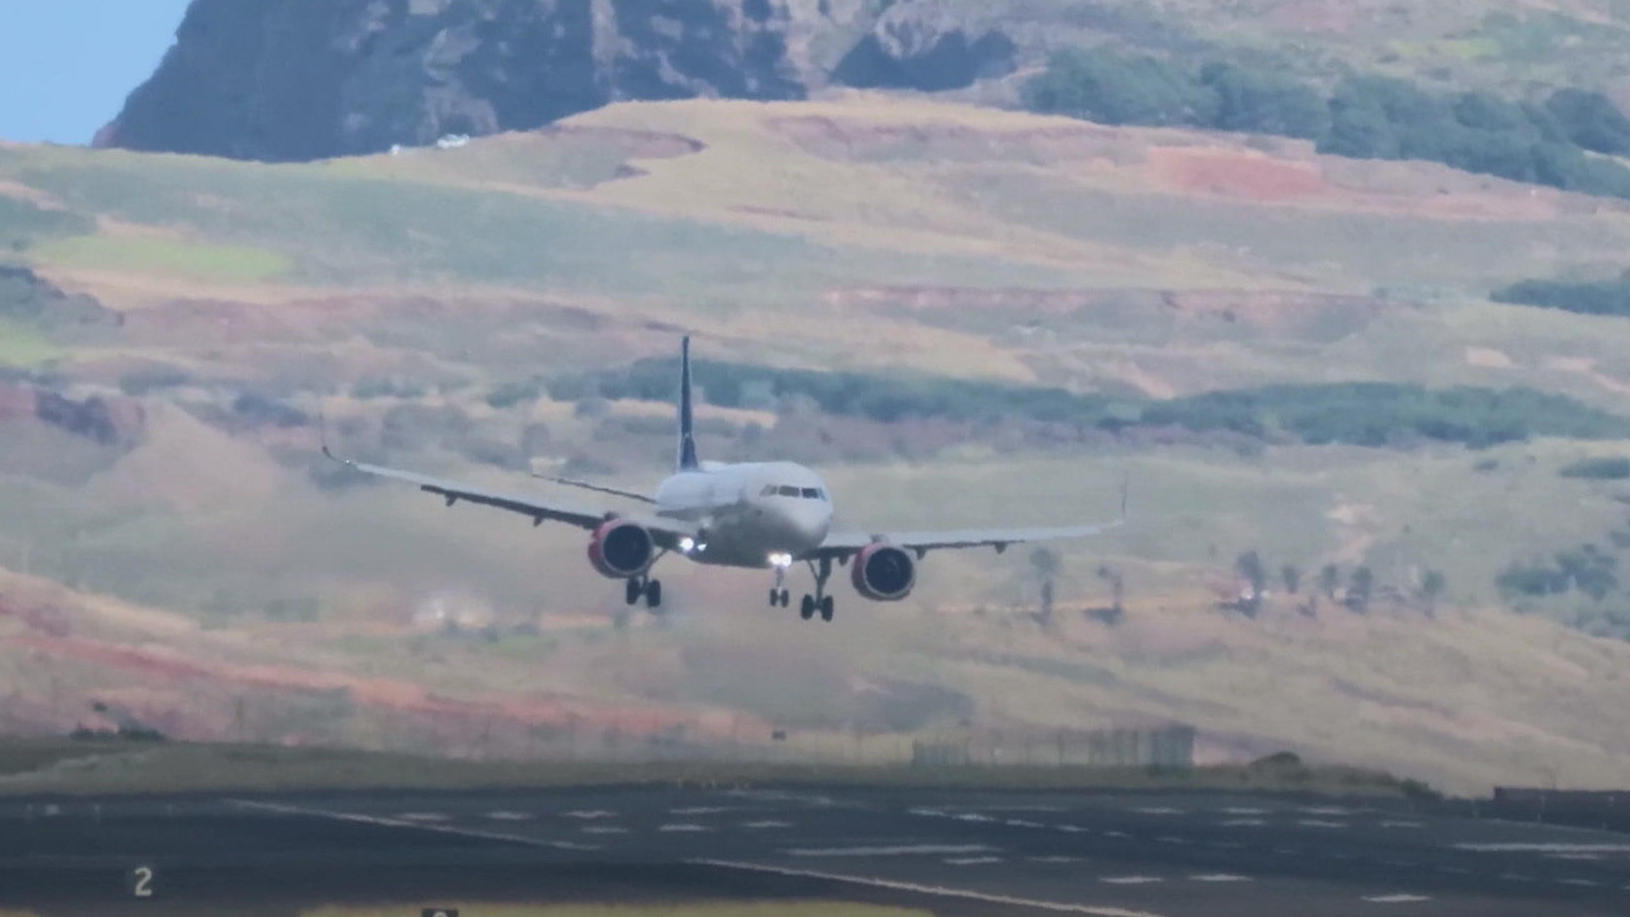 Madeira: Landing approach failed – the plane collided and took off again